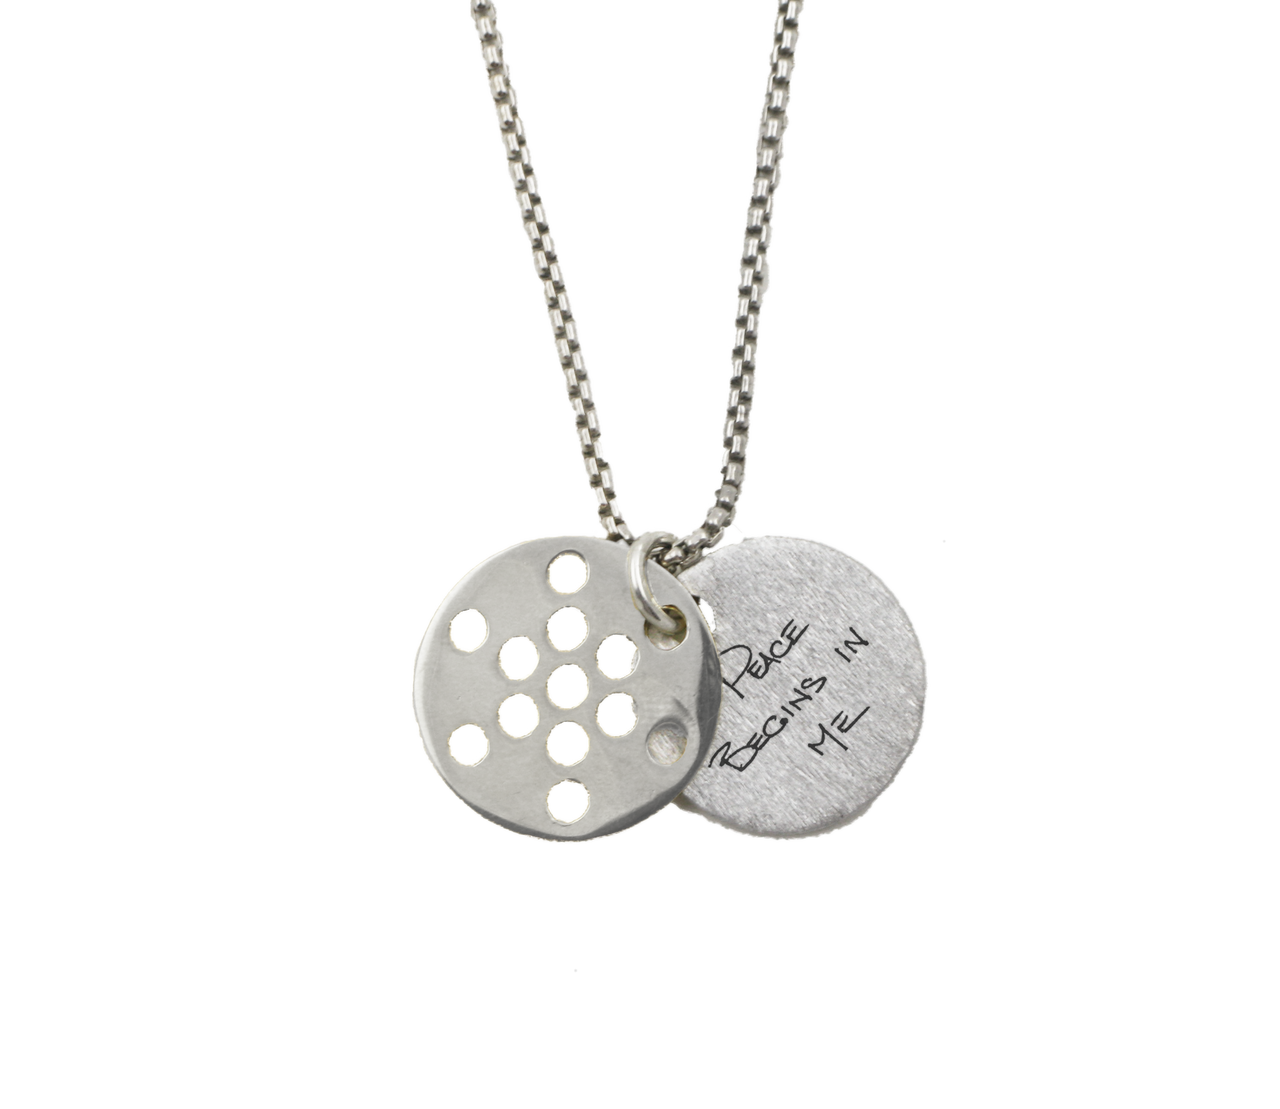 ARTICLE22 Fruit Of Life -Leo Necklace 1.9cm Jewellery | necklaces | Australian Jewellery | Jewellery Store | Jewellery shops | Online Jewellery | Gifts | Presents | Xmas Presents | Birthday Present | Wedding Gift | silver chain | Men's necklace Upcycle Studio